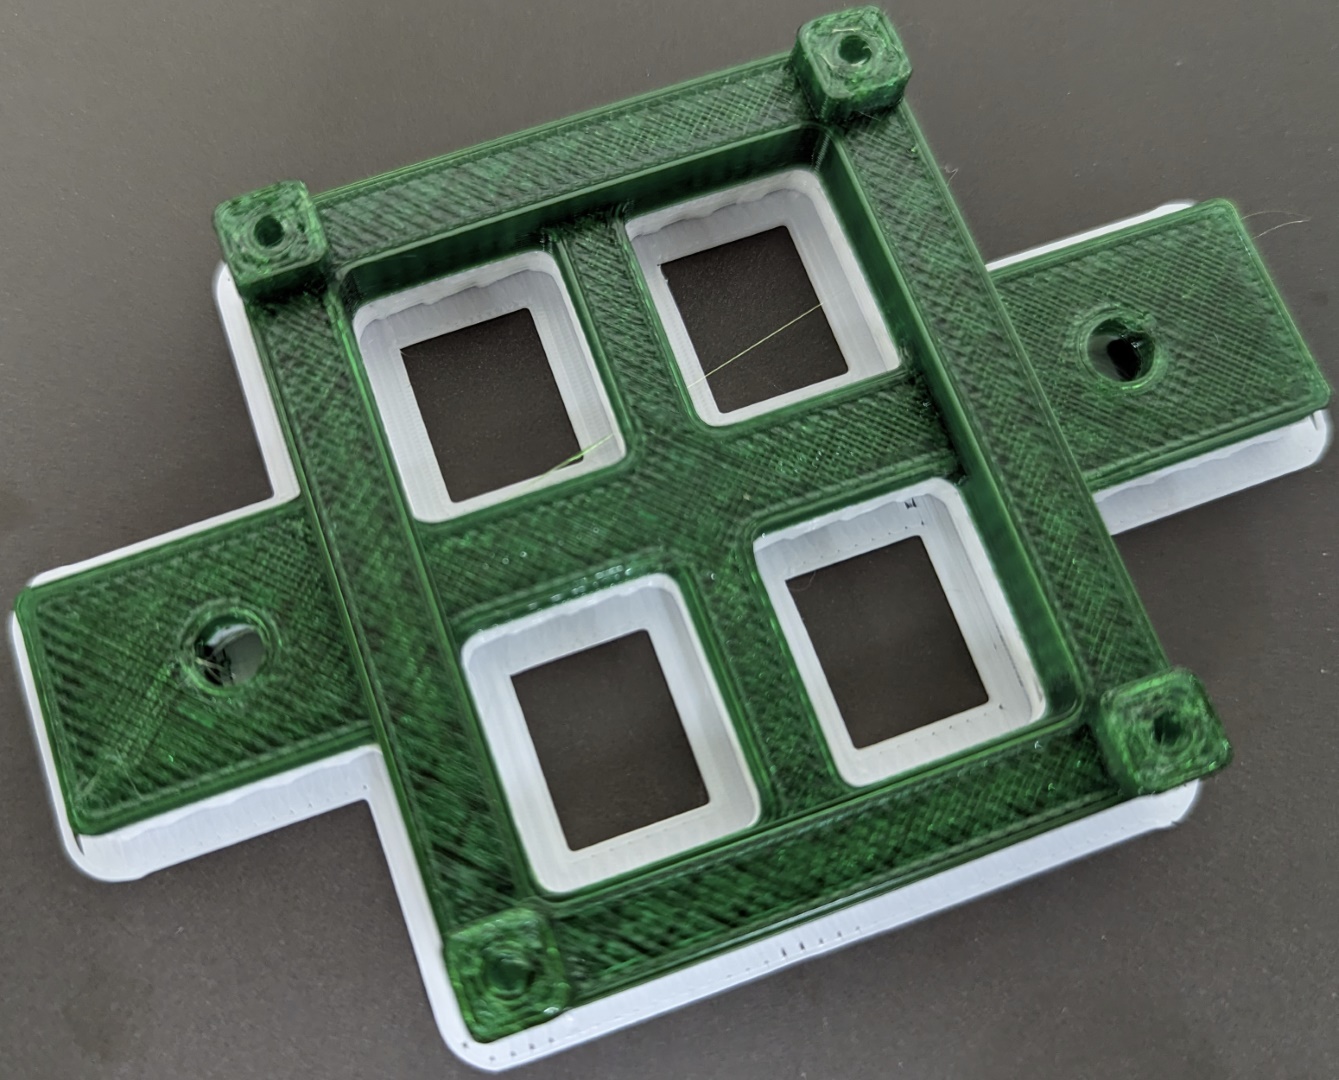 3D printed Green plastic part on top of white plastic support